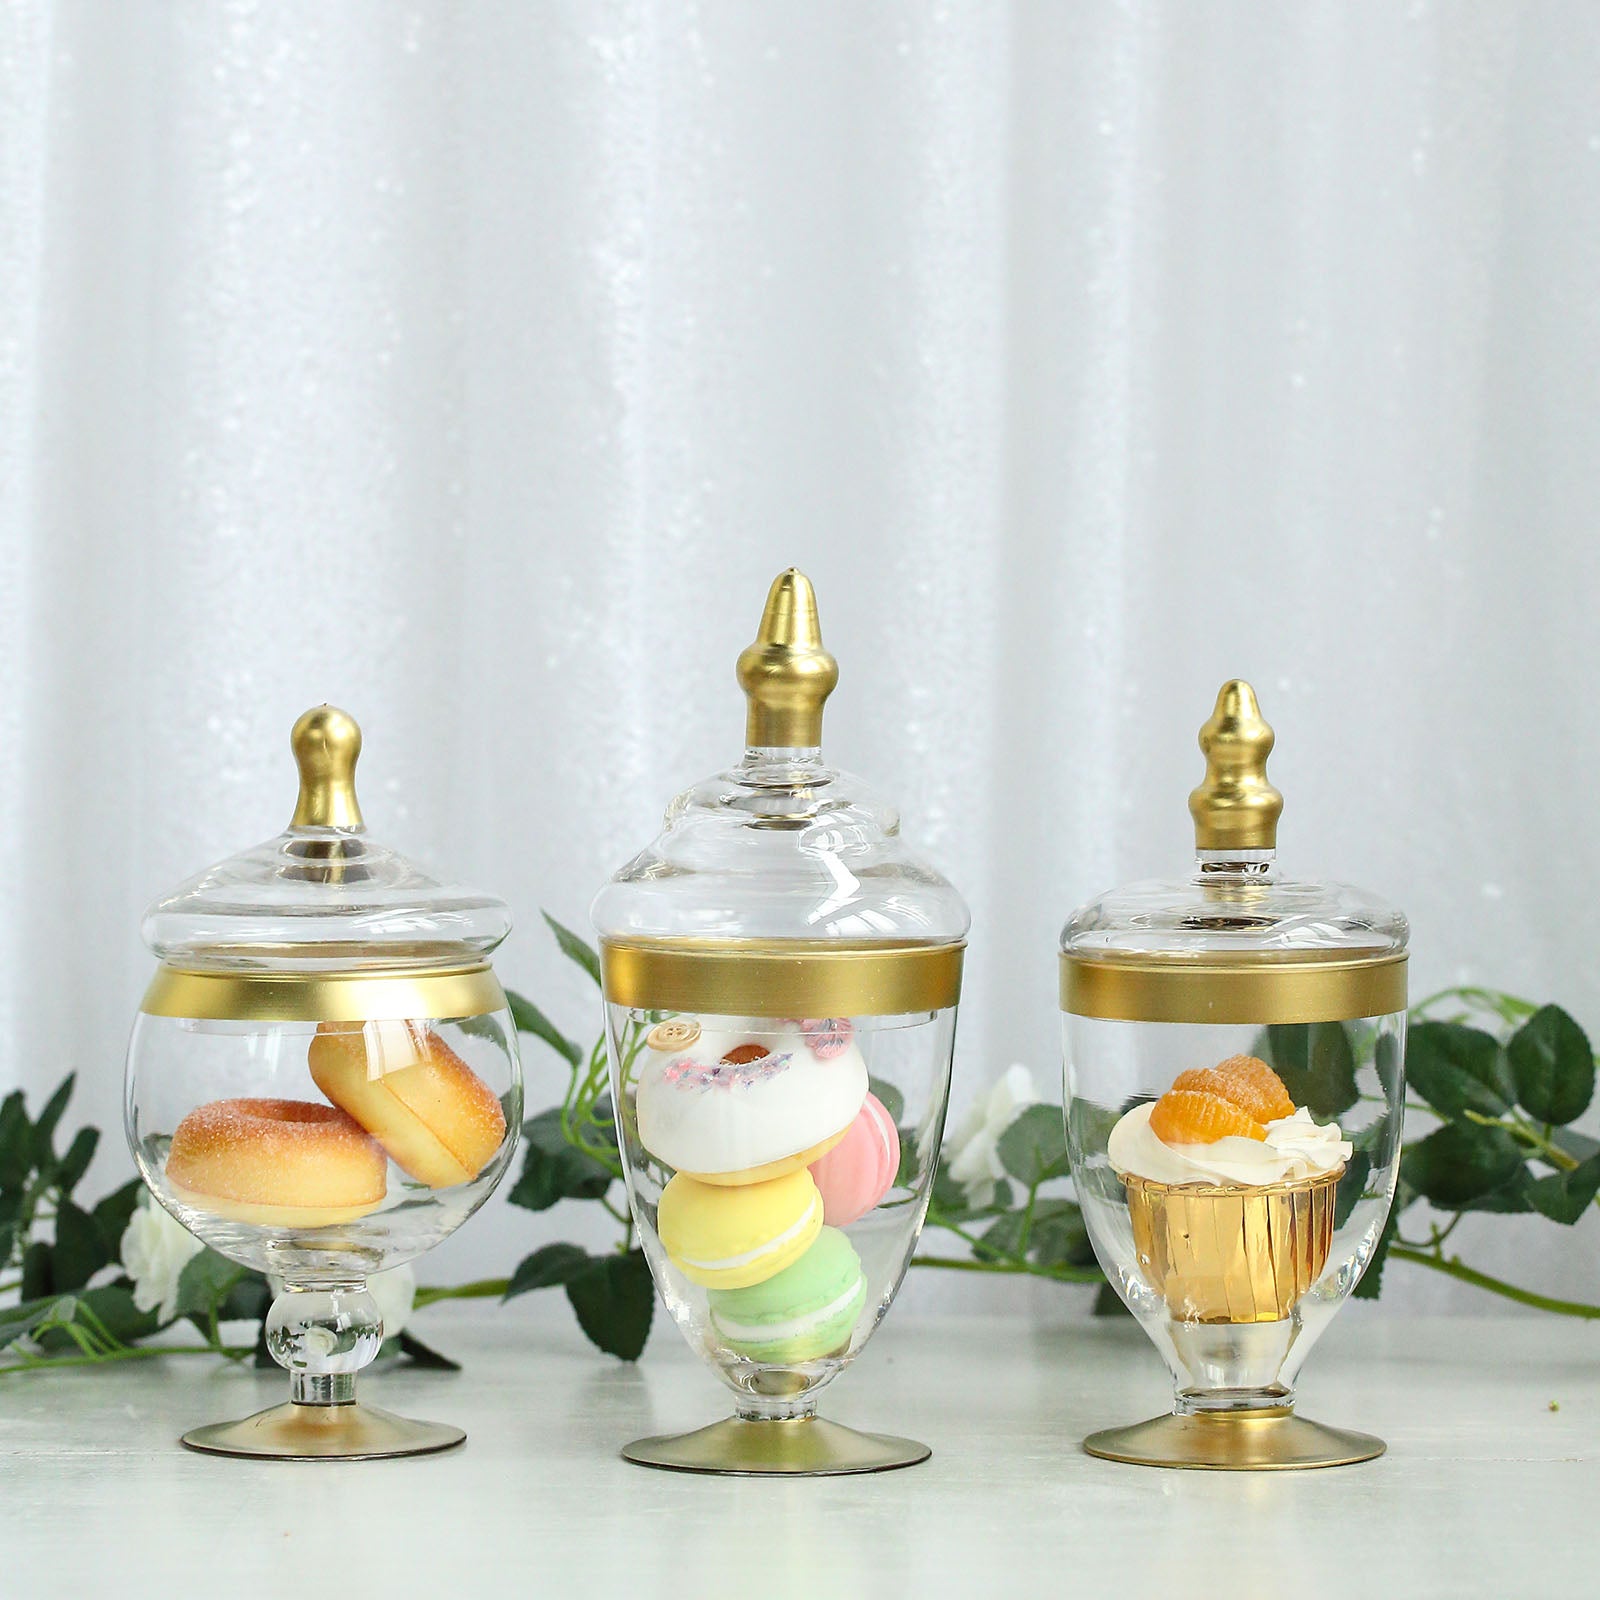 3 pcs 9 13 14 tall Clear Glass Apothecary Jars with Lids